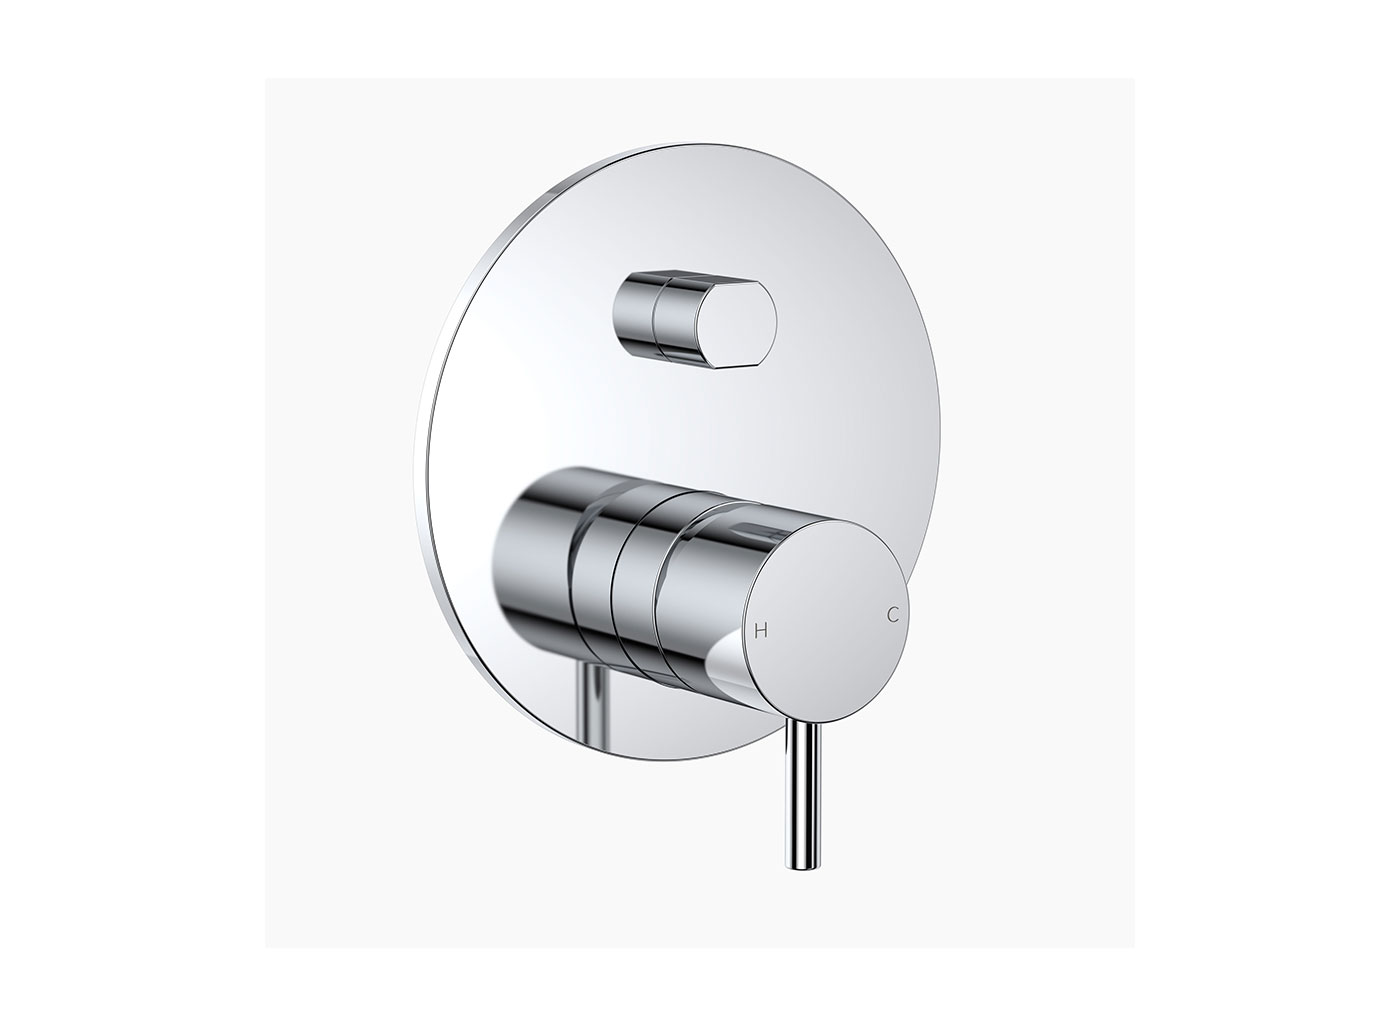 Clark's Round Pin Wall mixer with Diverter allows you to effortlessly choose between diverting water to your shower or your bath outlet with a simple twist of the handle